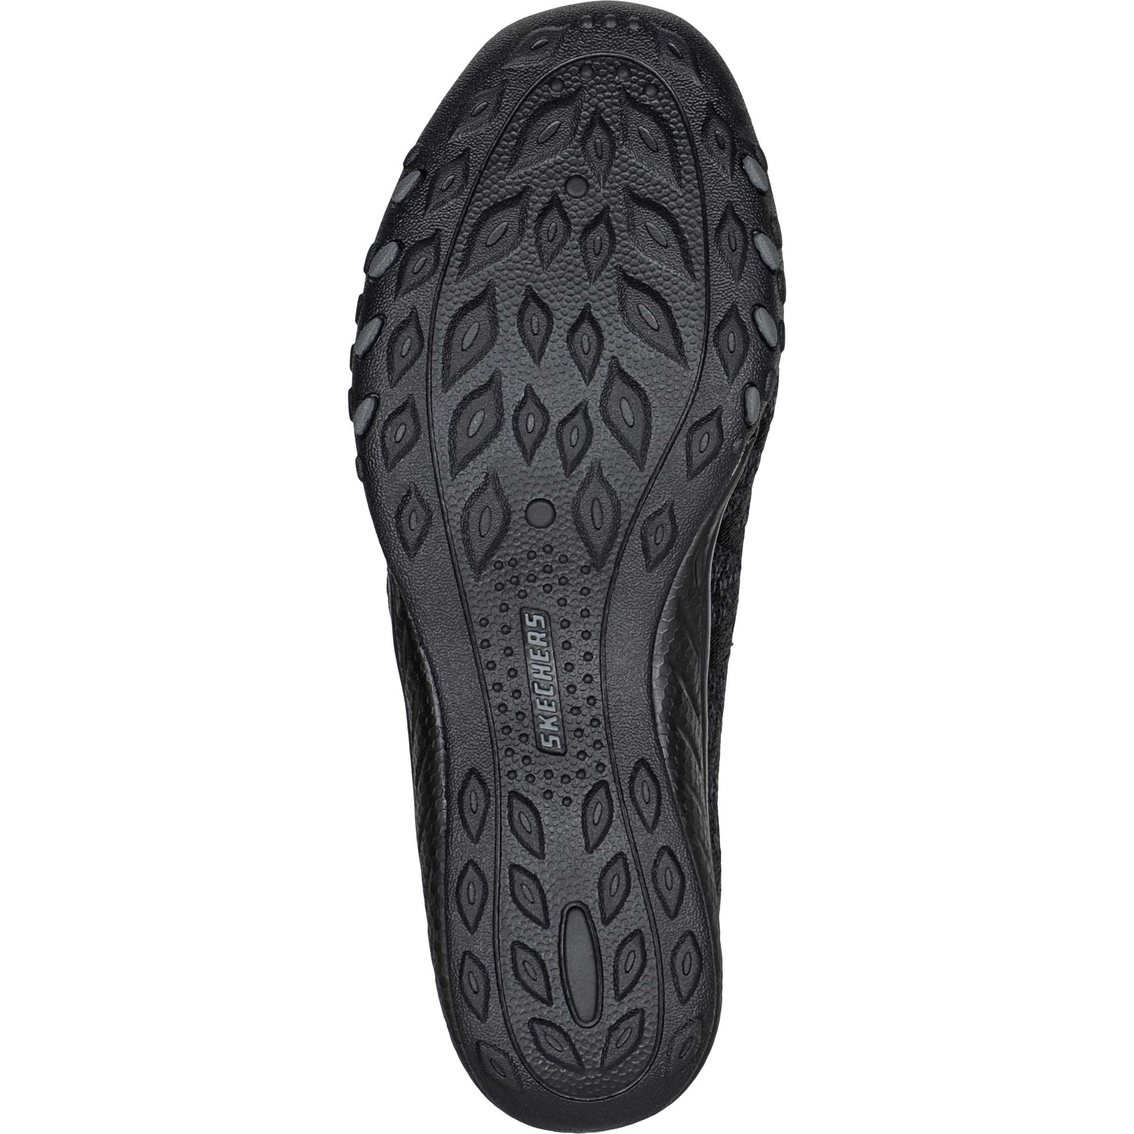 Skechers Relaxed Fit Breathe Easy Infi-knity Slip Ons - Image 5 of 5